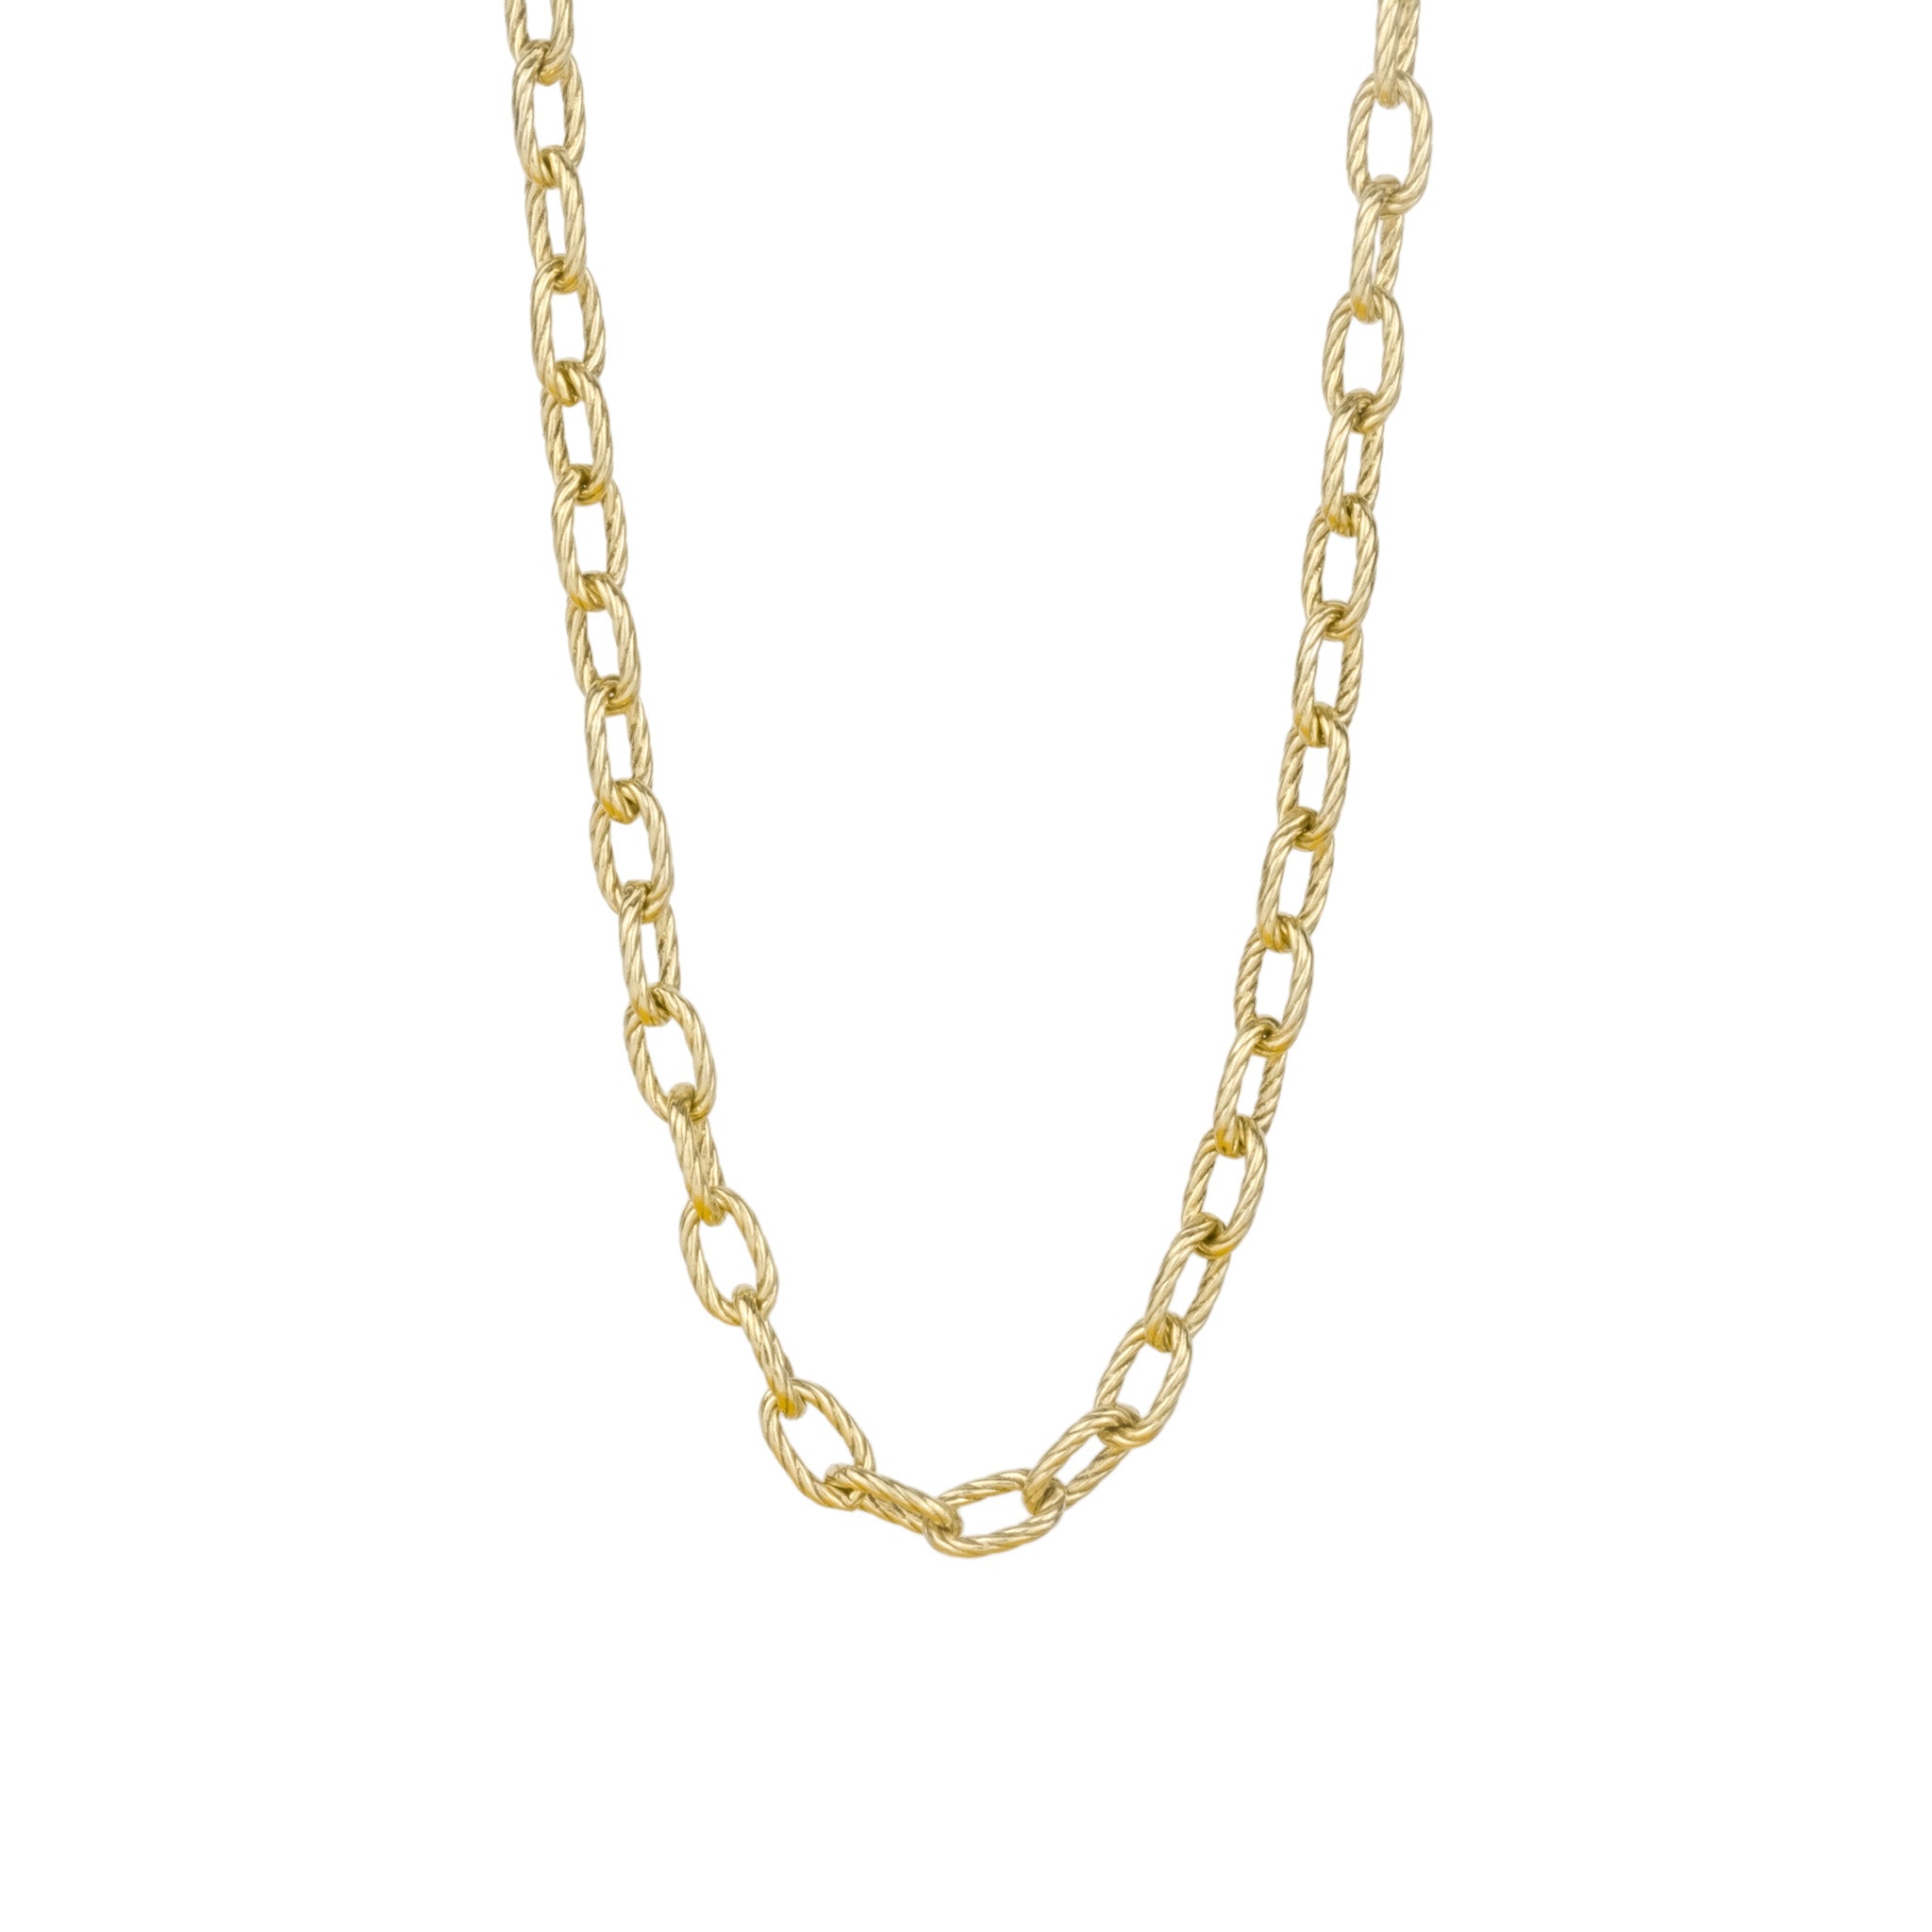 An Aiden Jae Banyan Cable Chain Necklace on a white background.